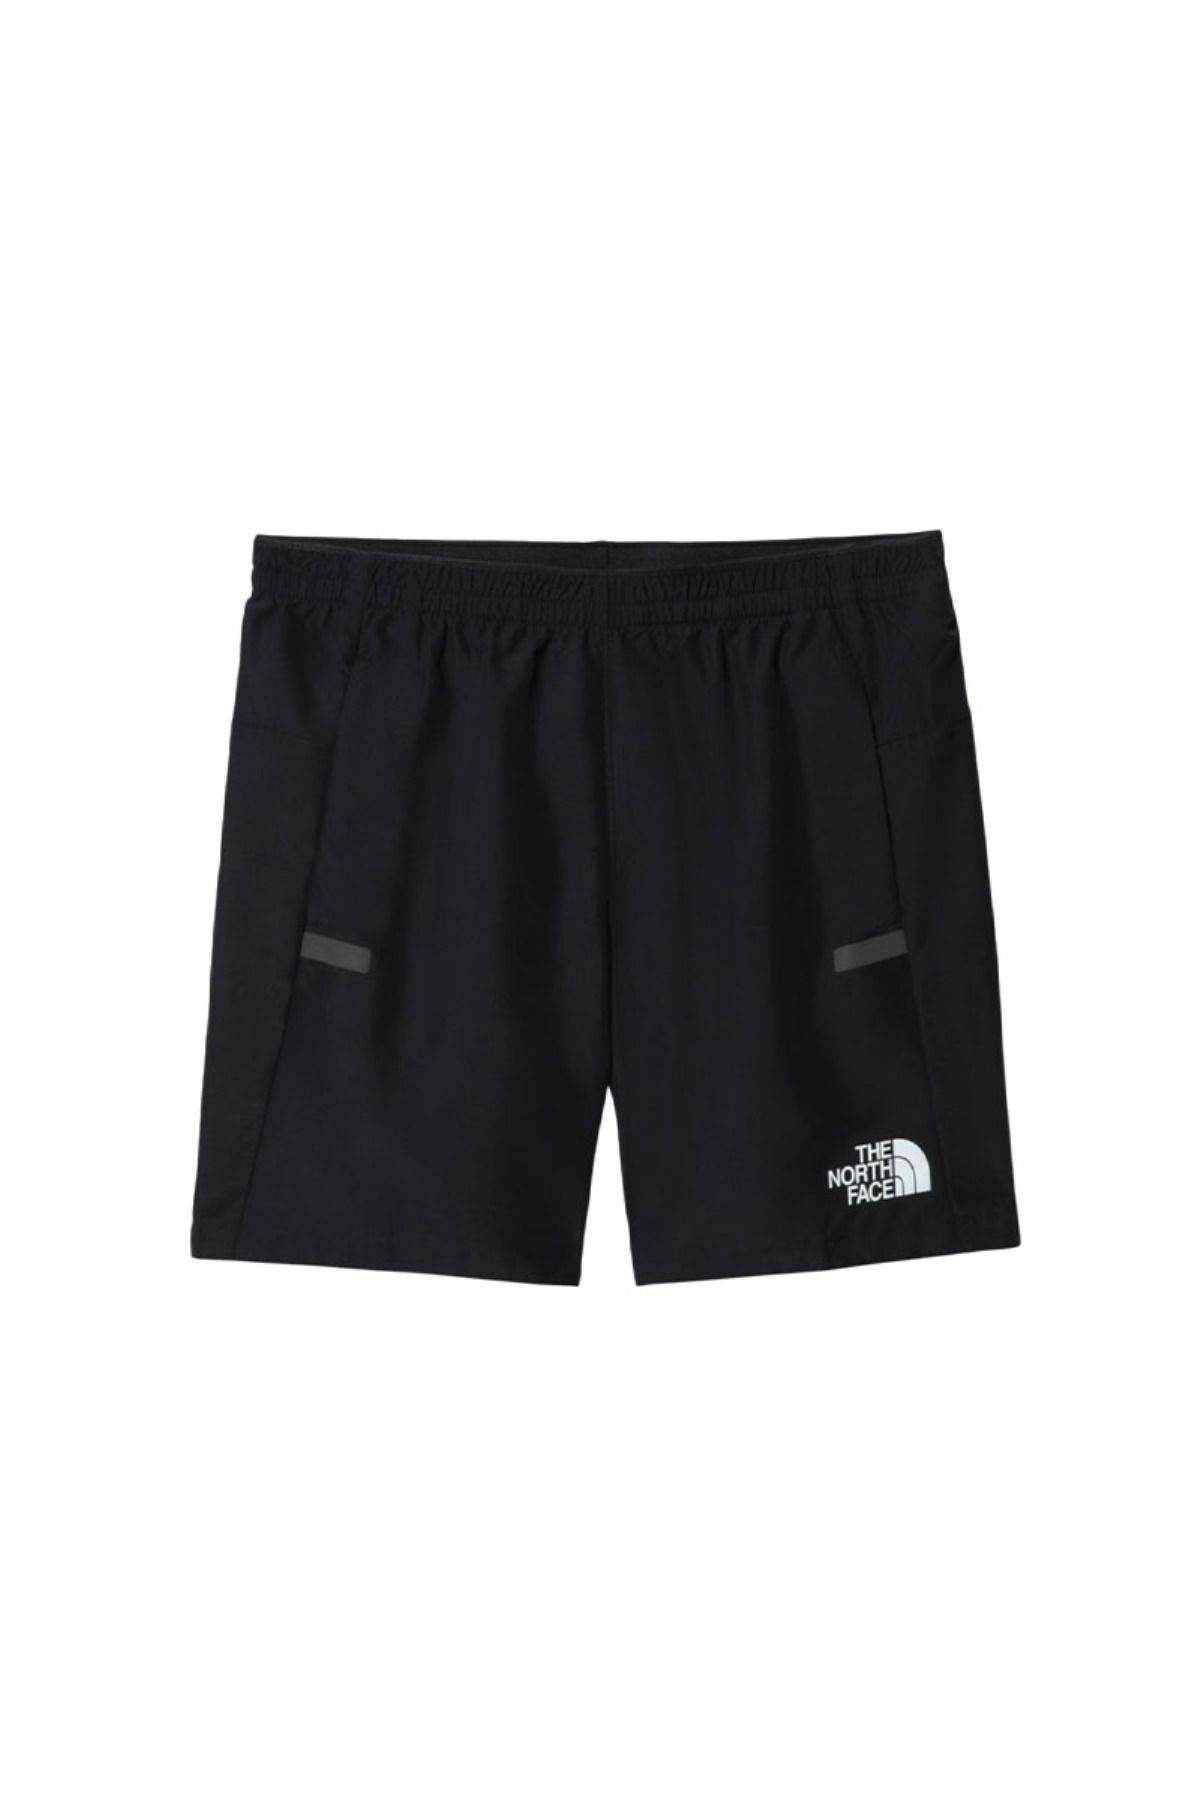 The North Face M Ma Woven Short